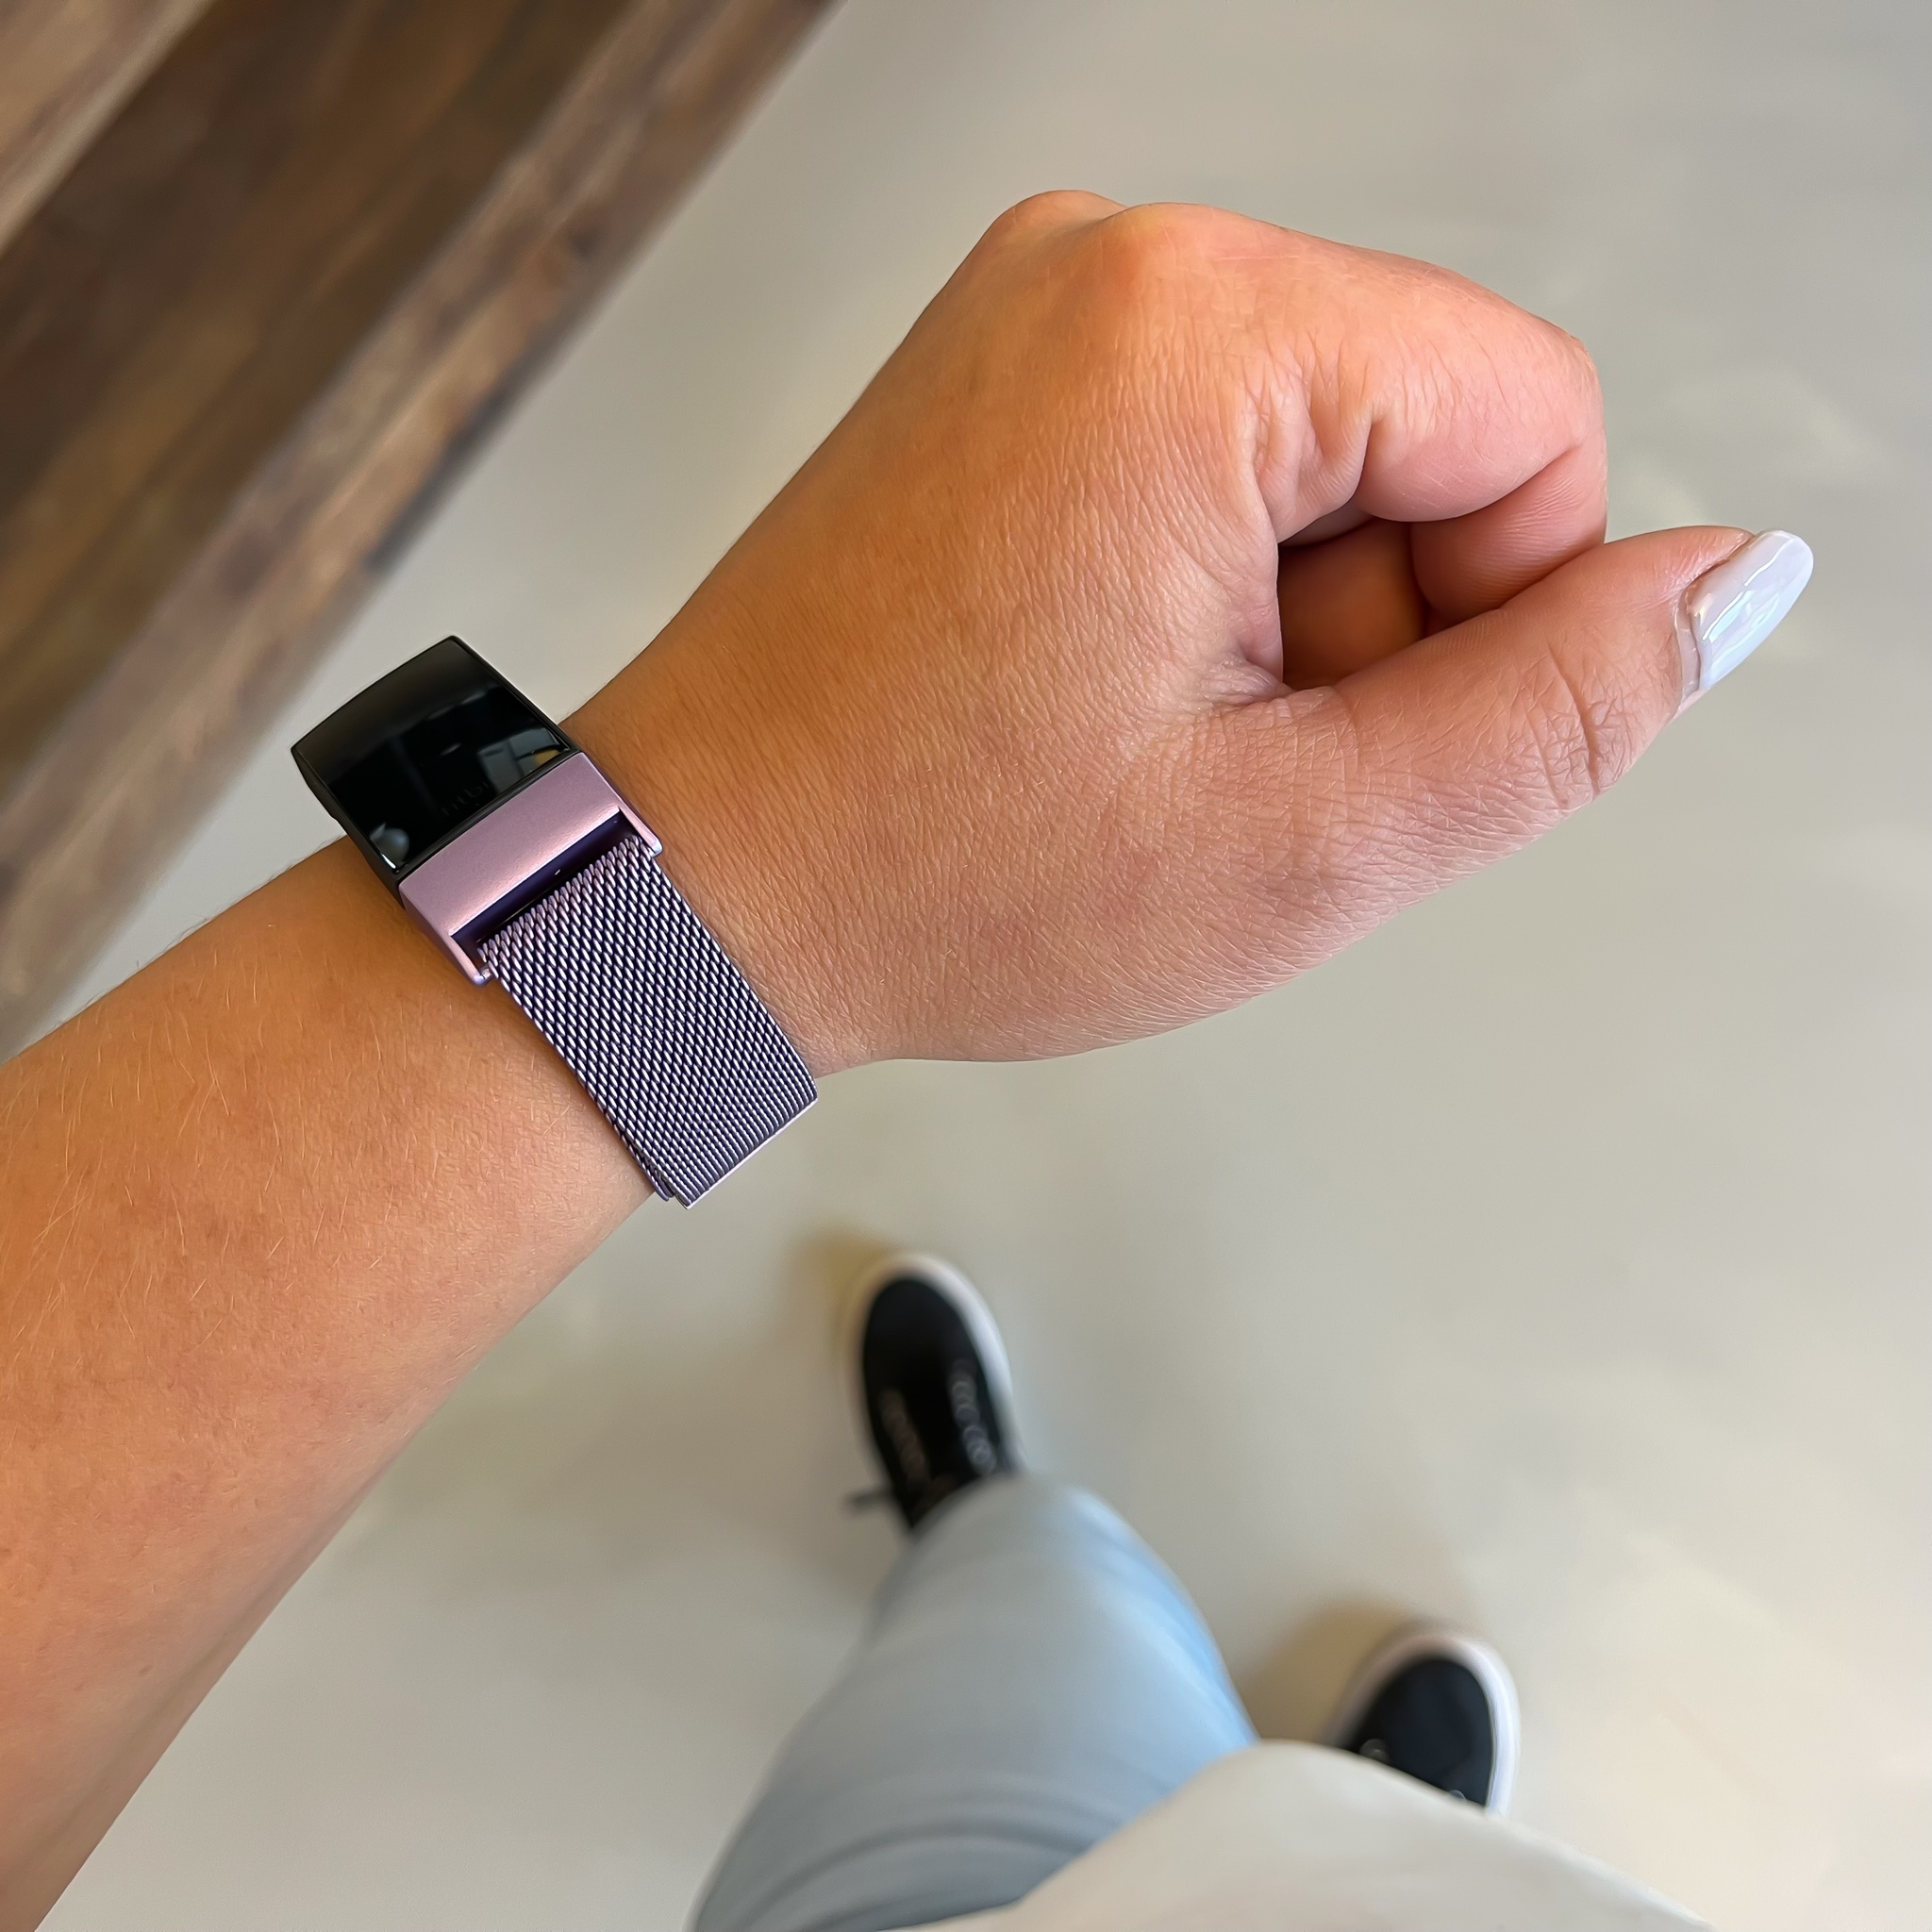 Fitbit Charge 3 & 4 milanese band - lavendel